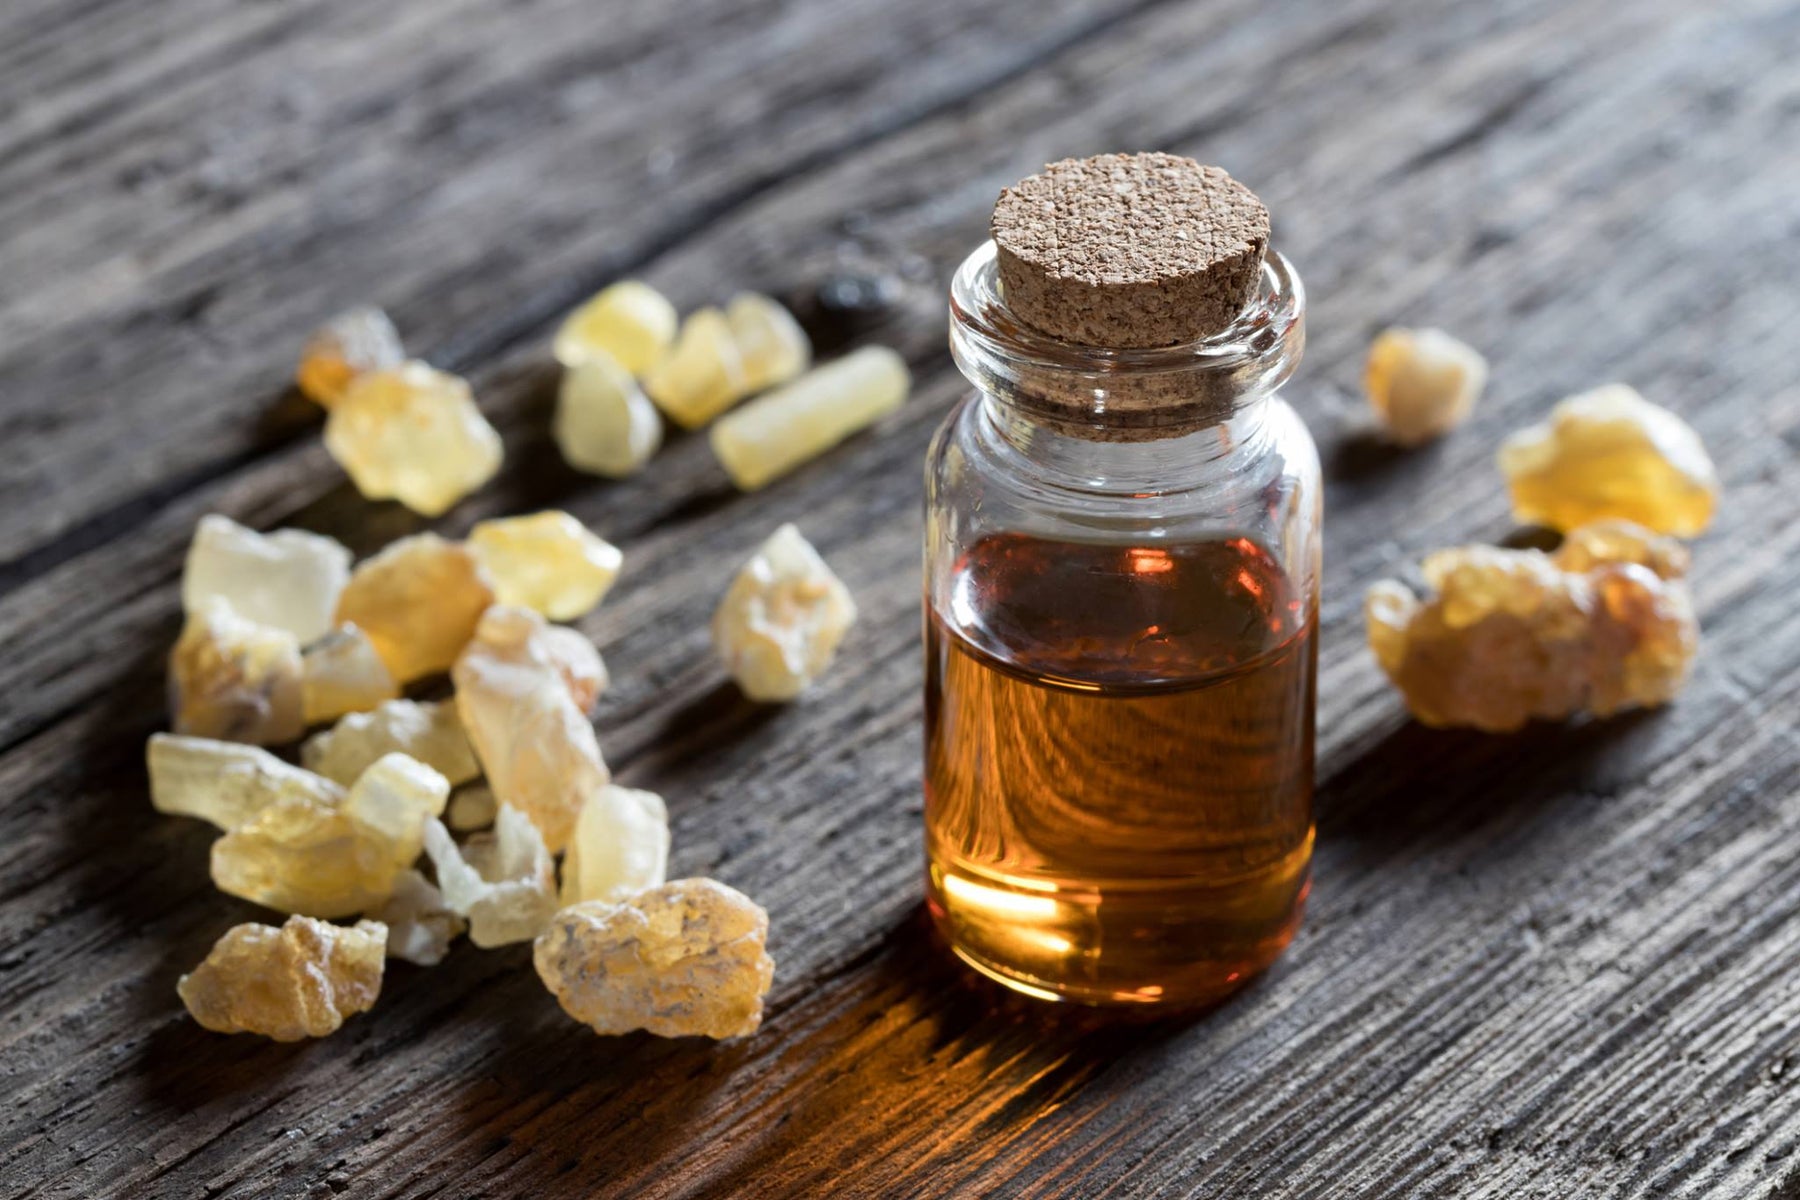 Sacred Frankincense Essential Oil - Boswellia Sacra, a treasure from the Middle East